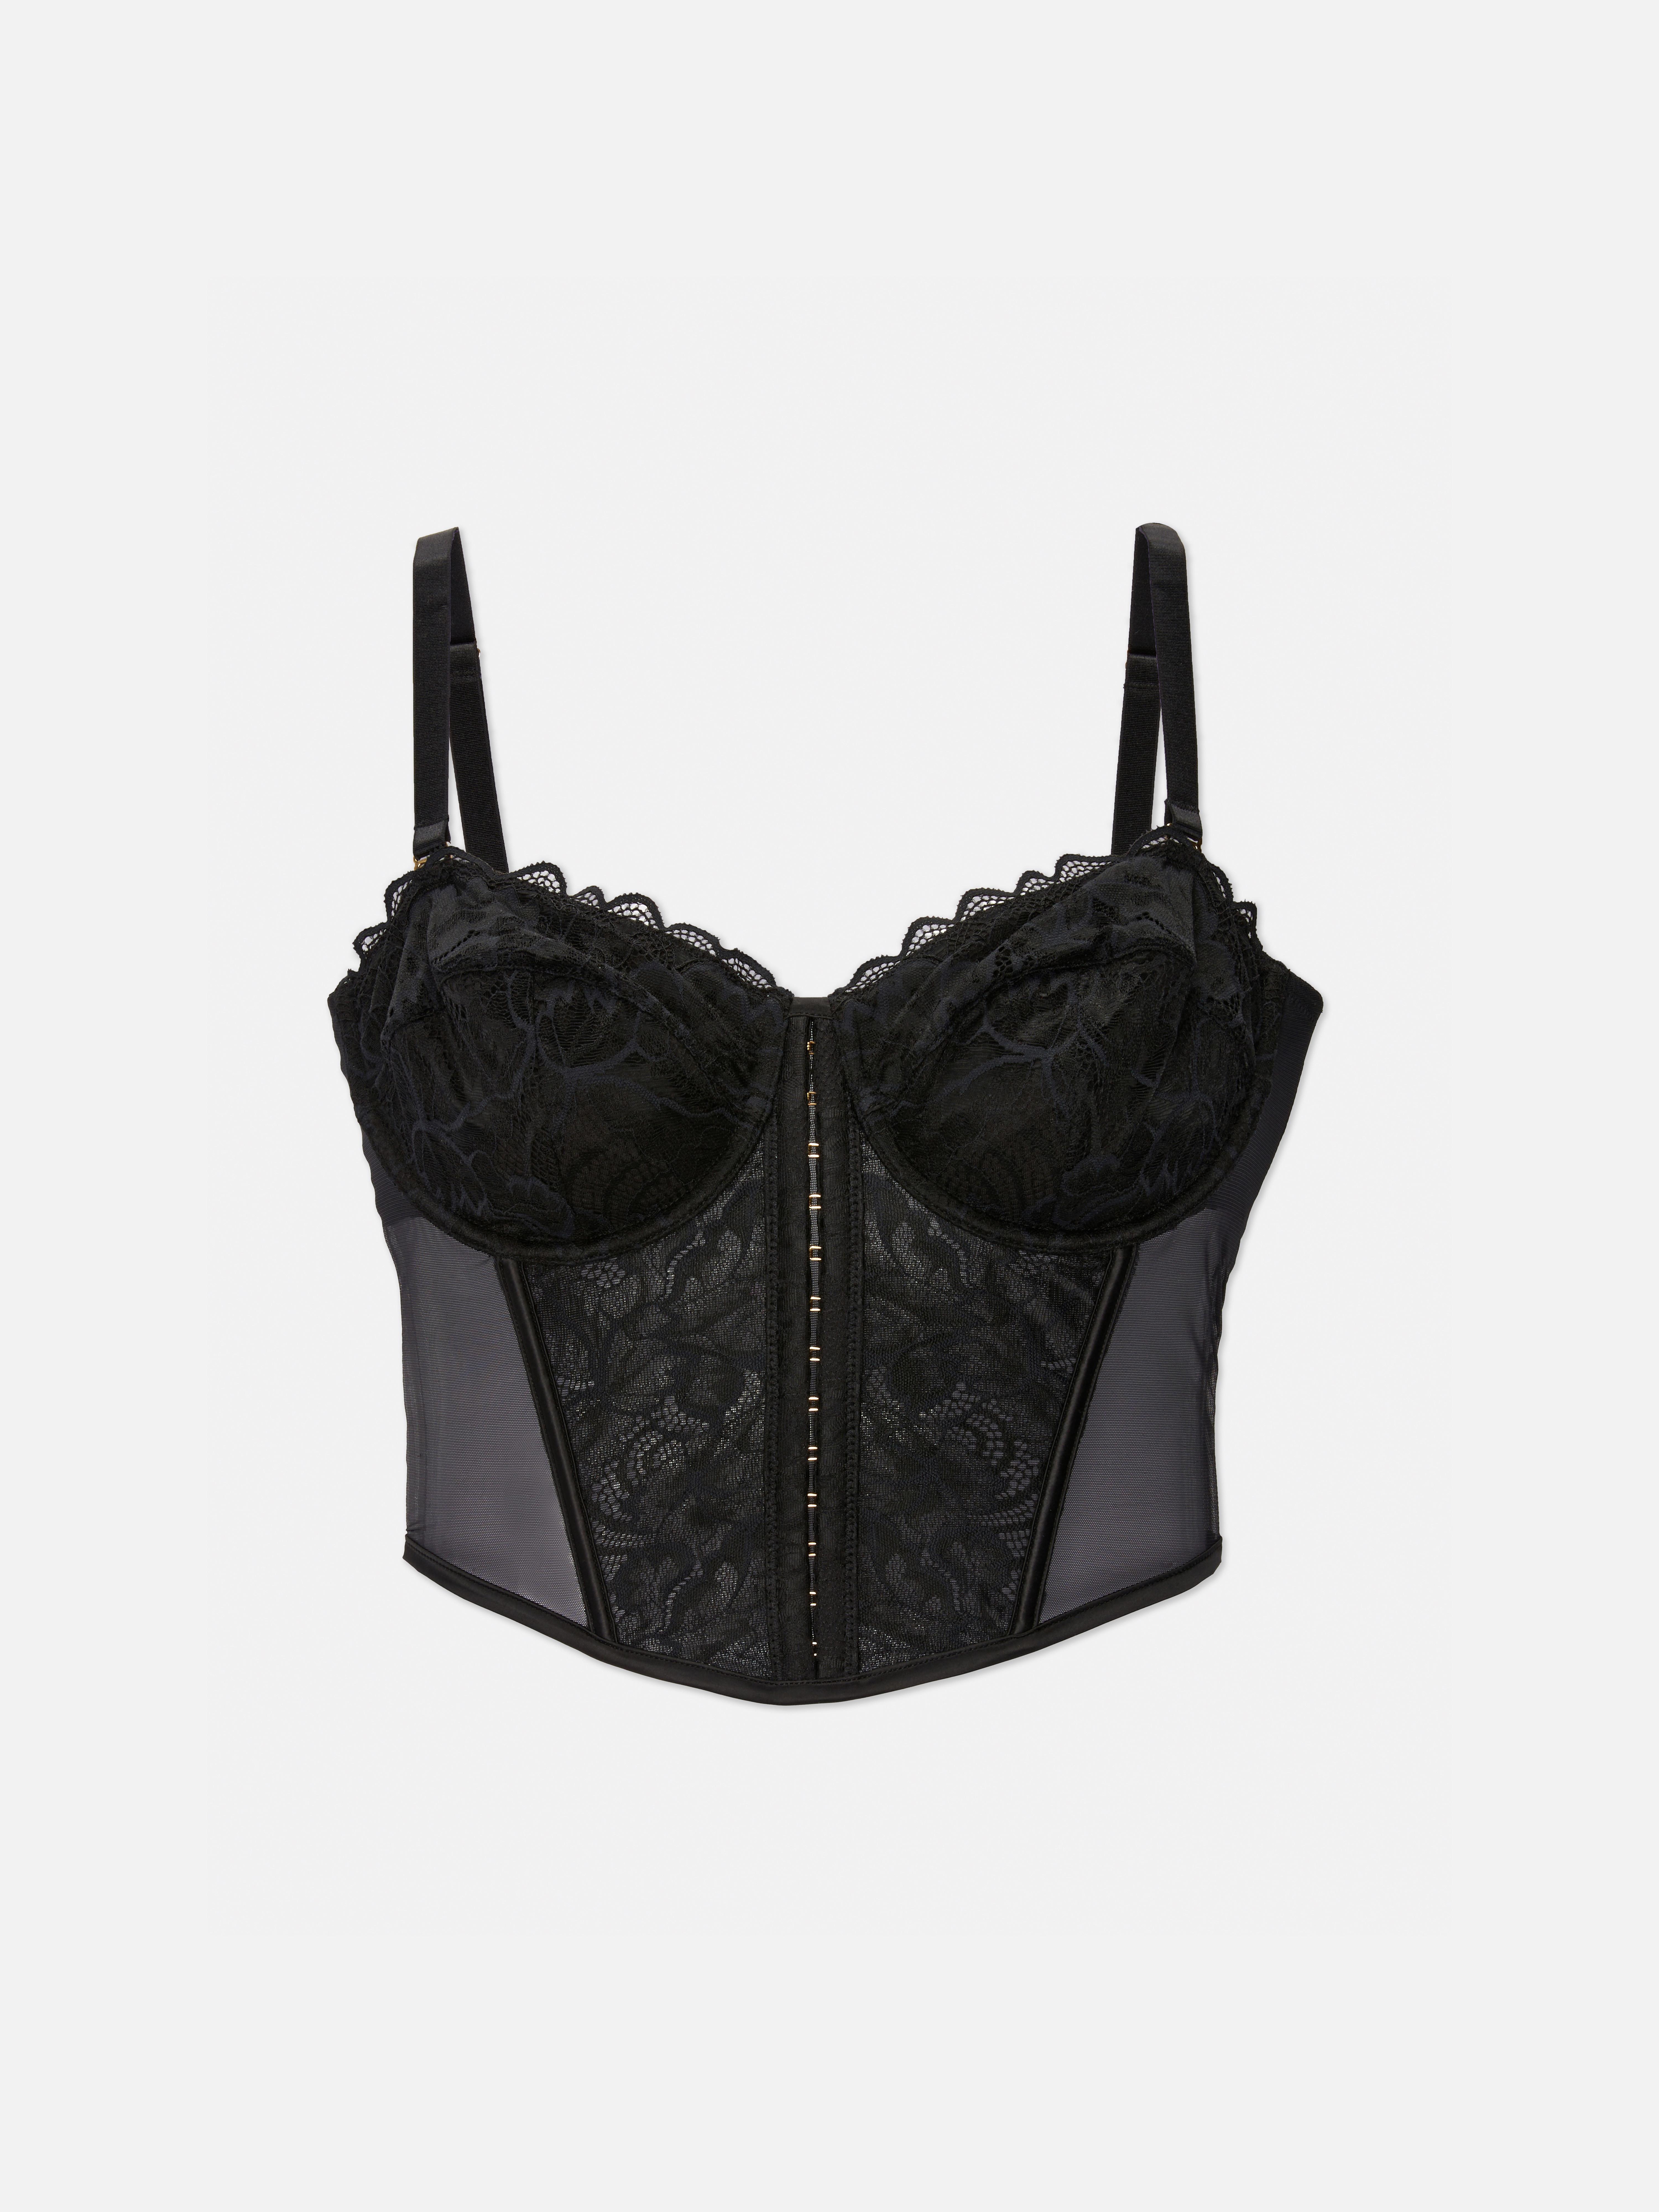 Primark - New year, new lingerie? 👀 Corset £12, available in size